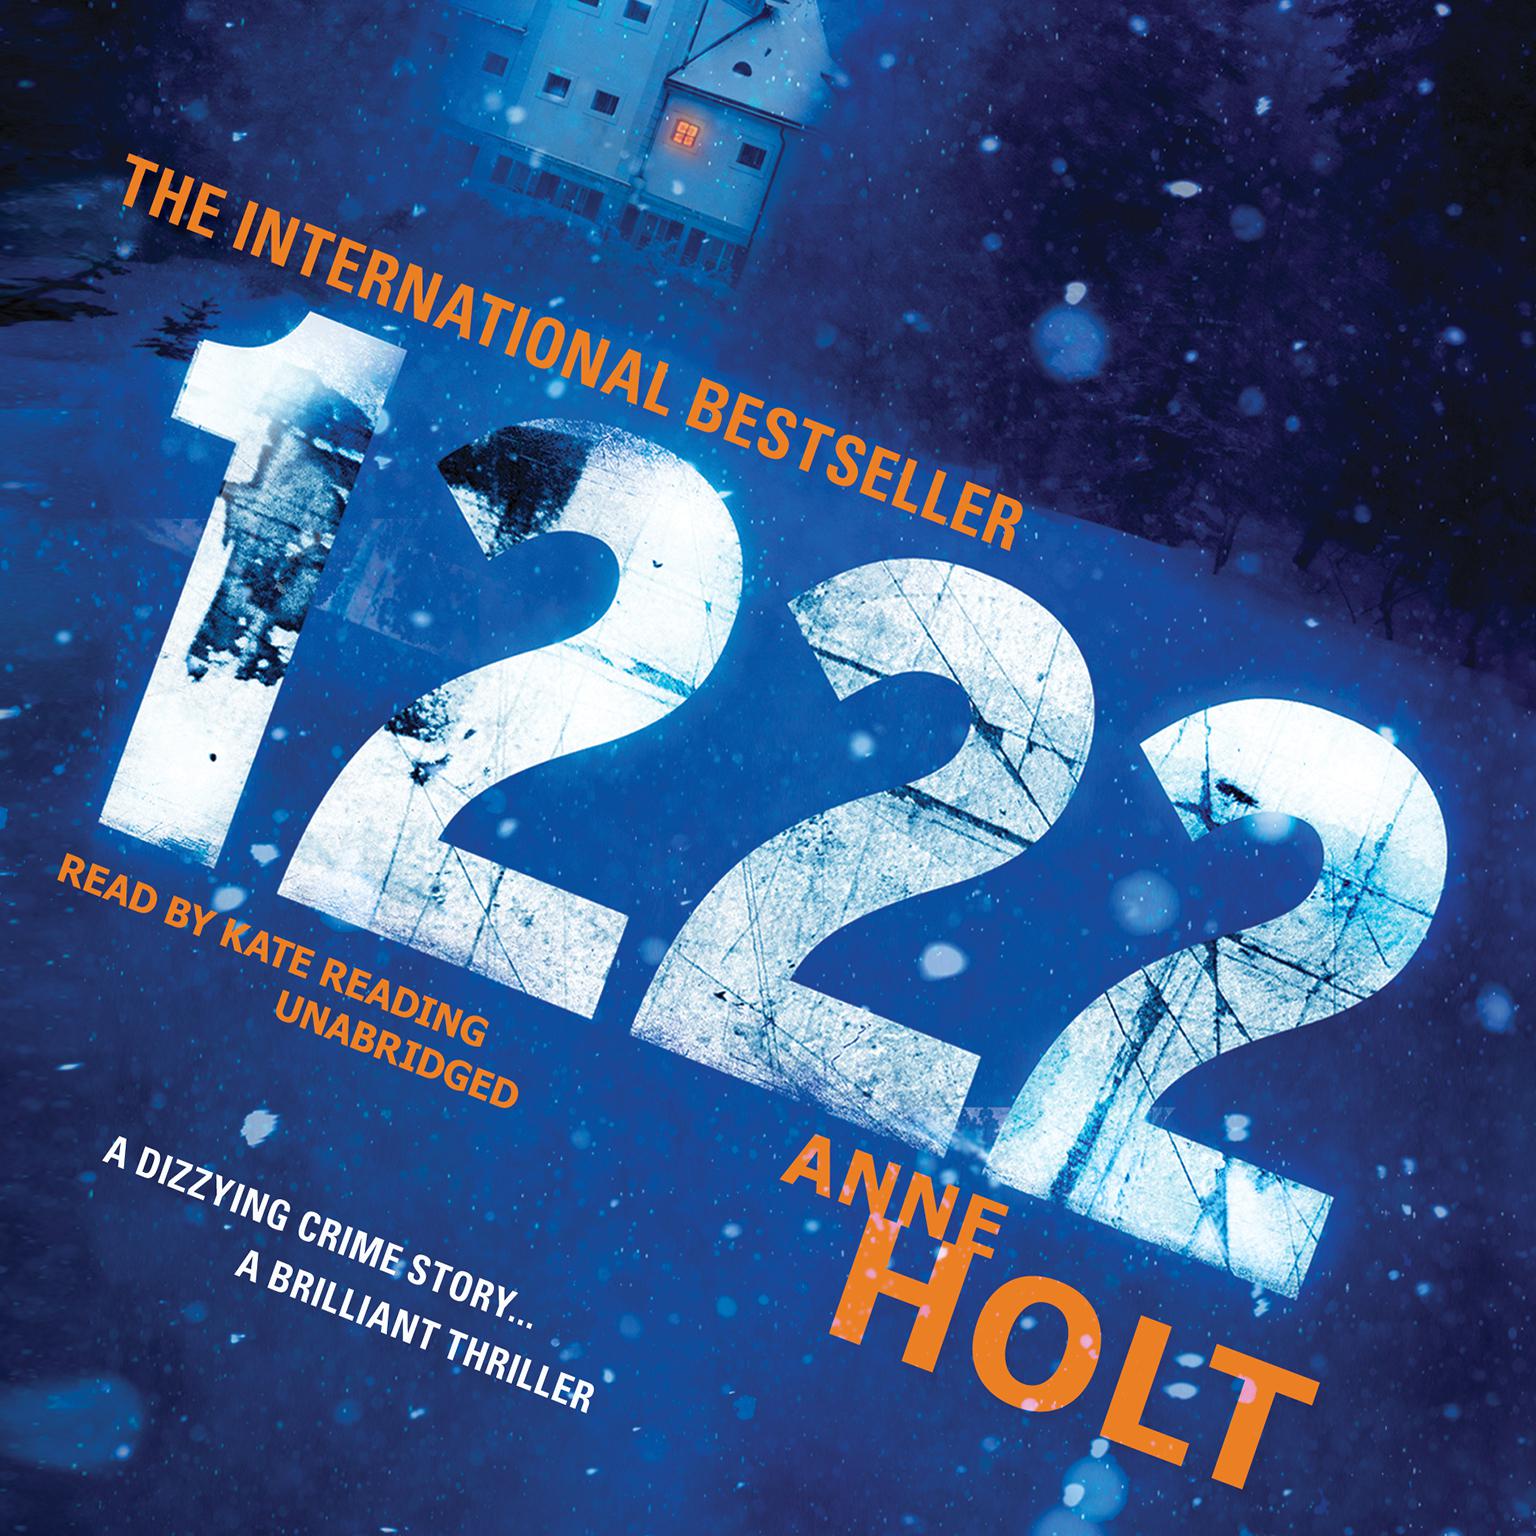 1222 Audiobook, by Anne Holt